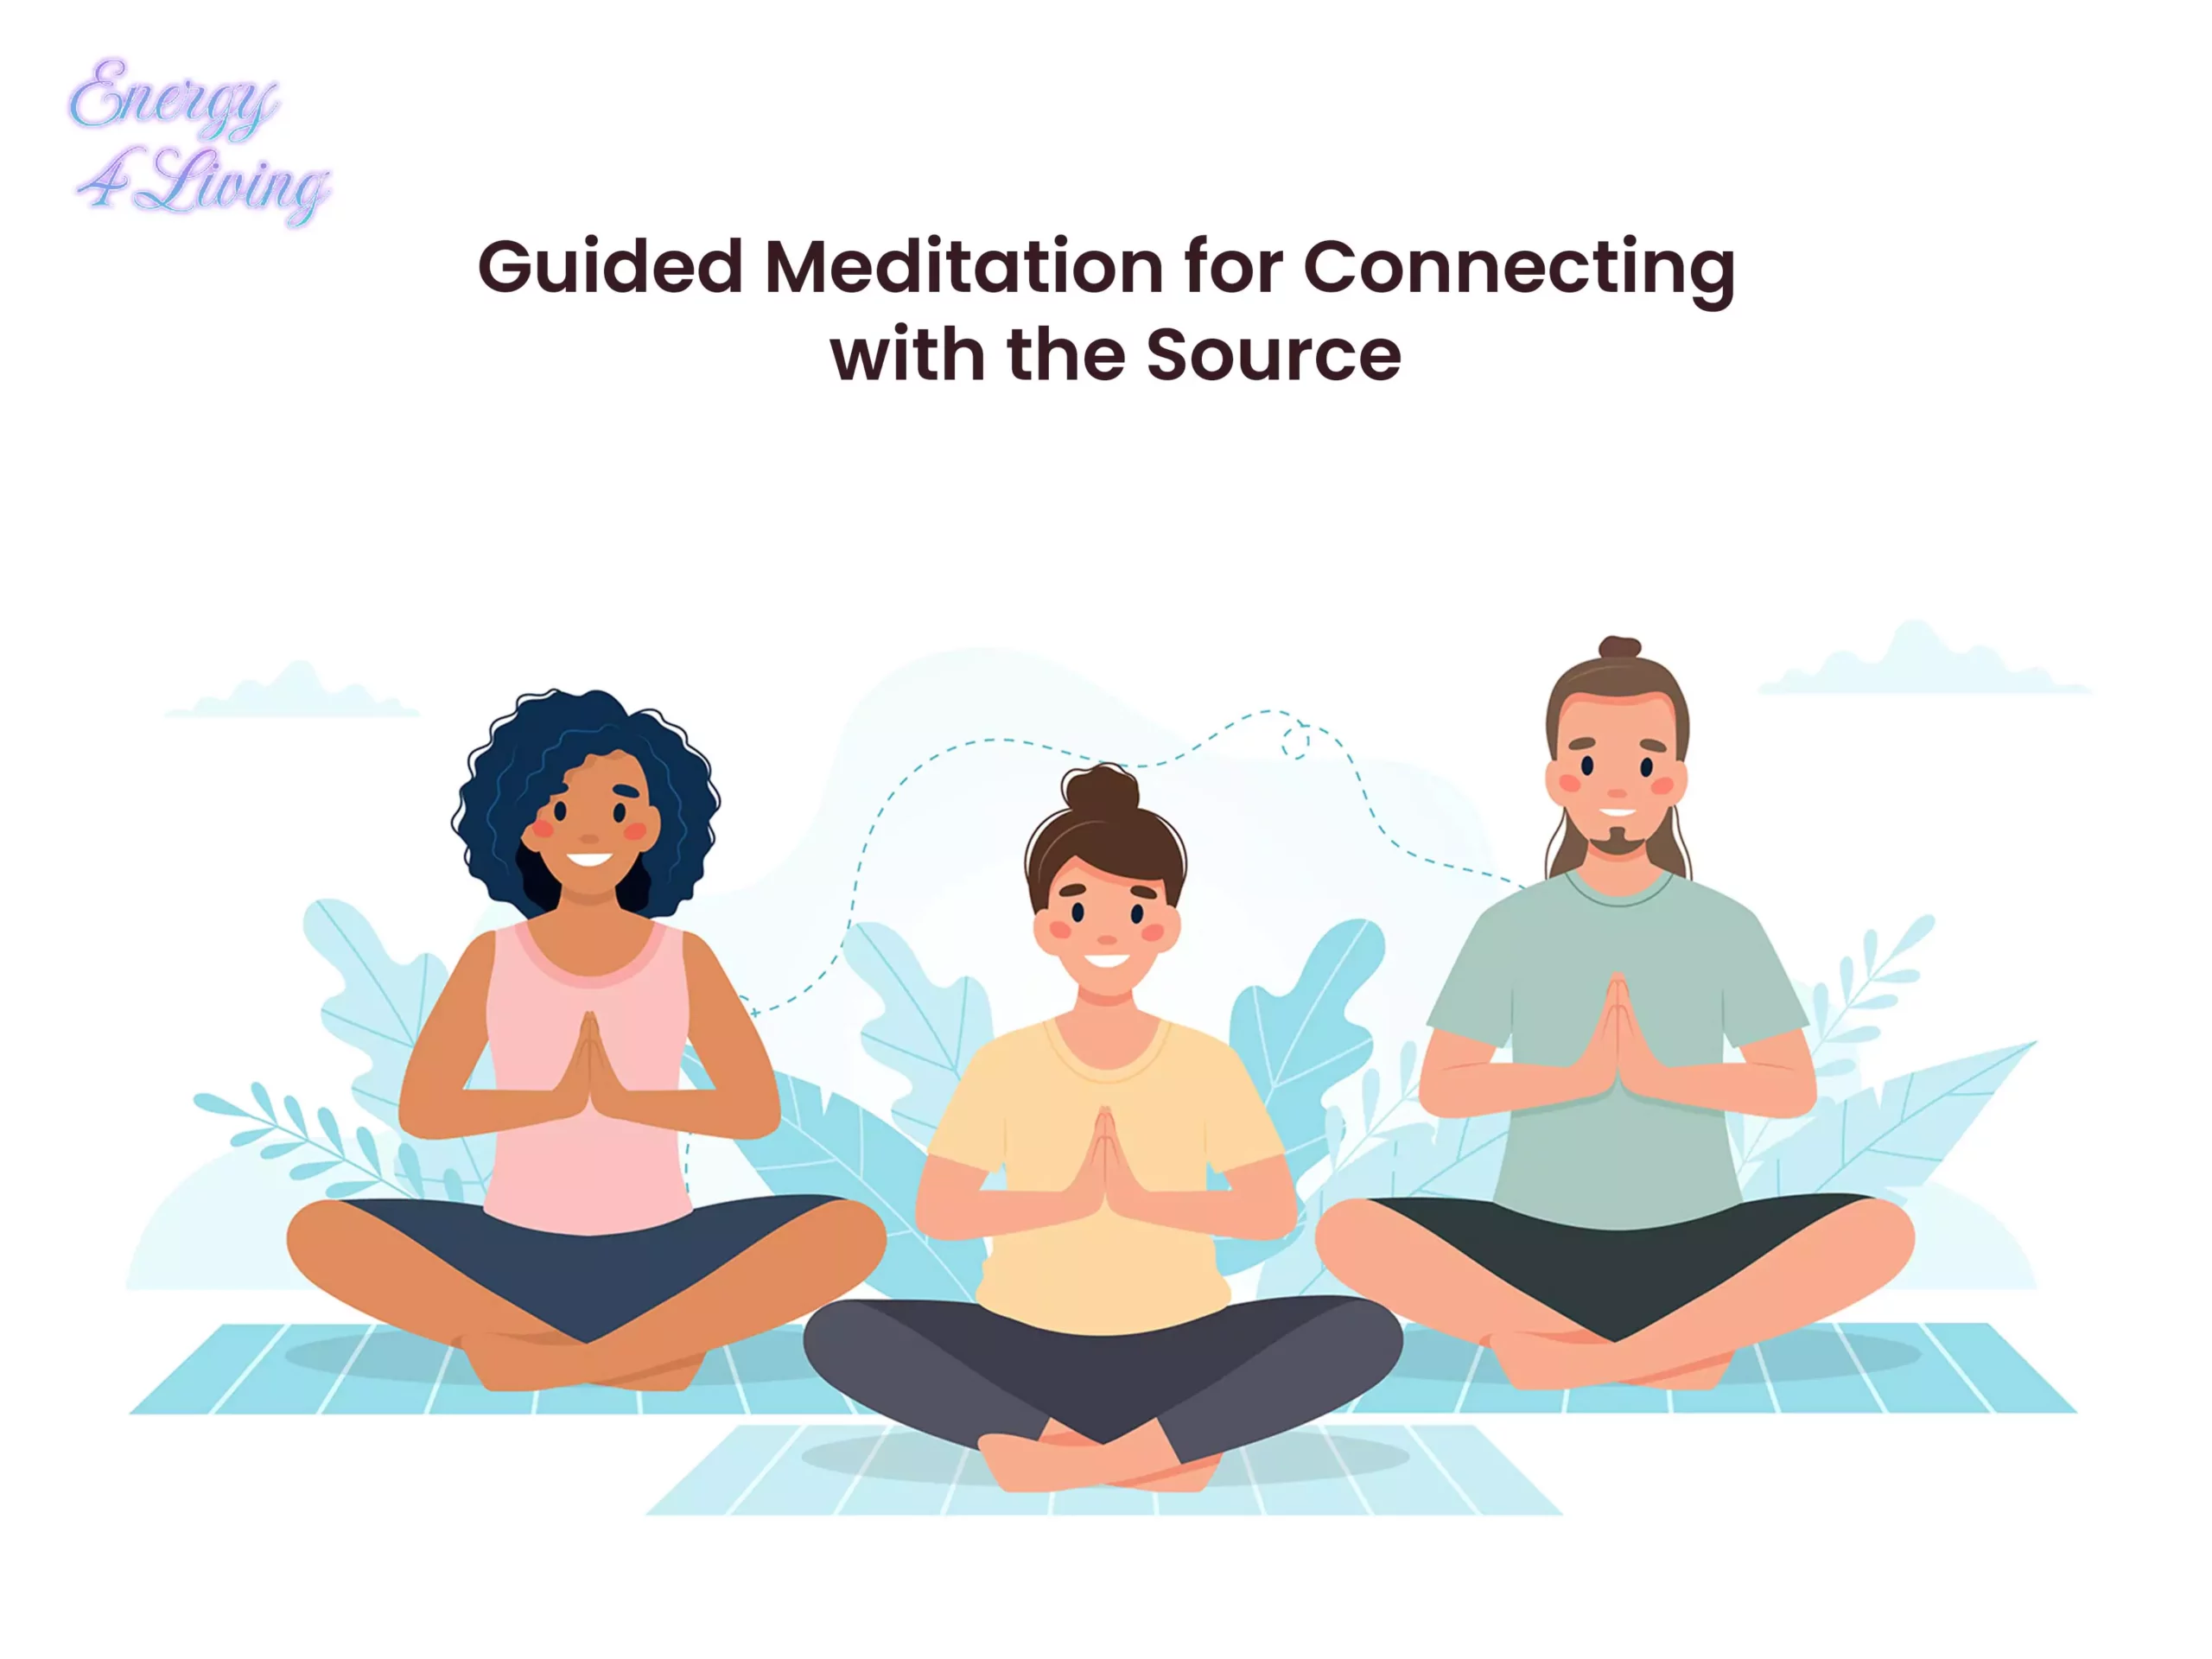 Guided Meditation for Connecting with the Source